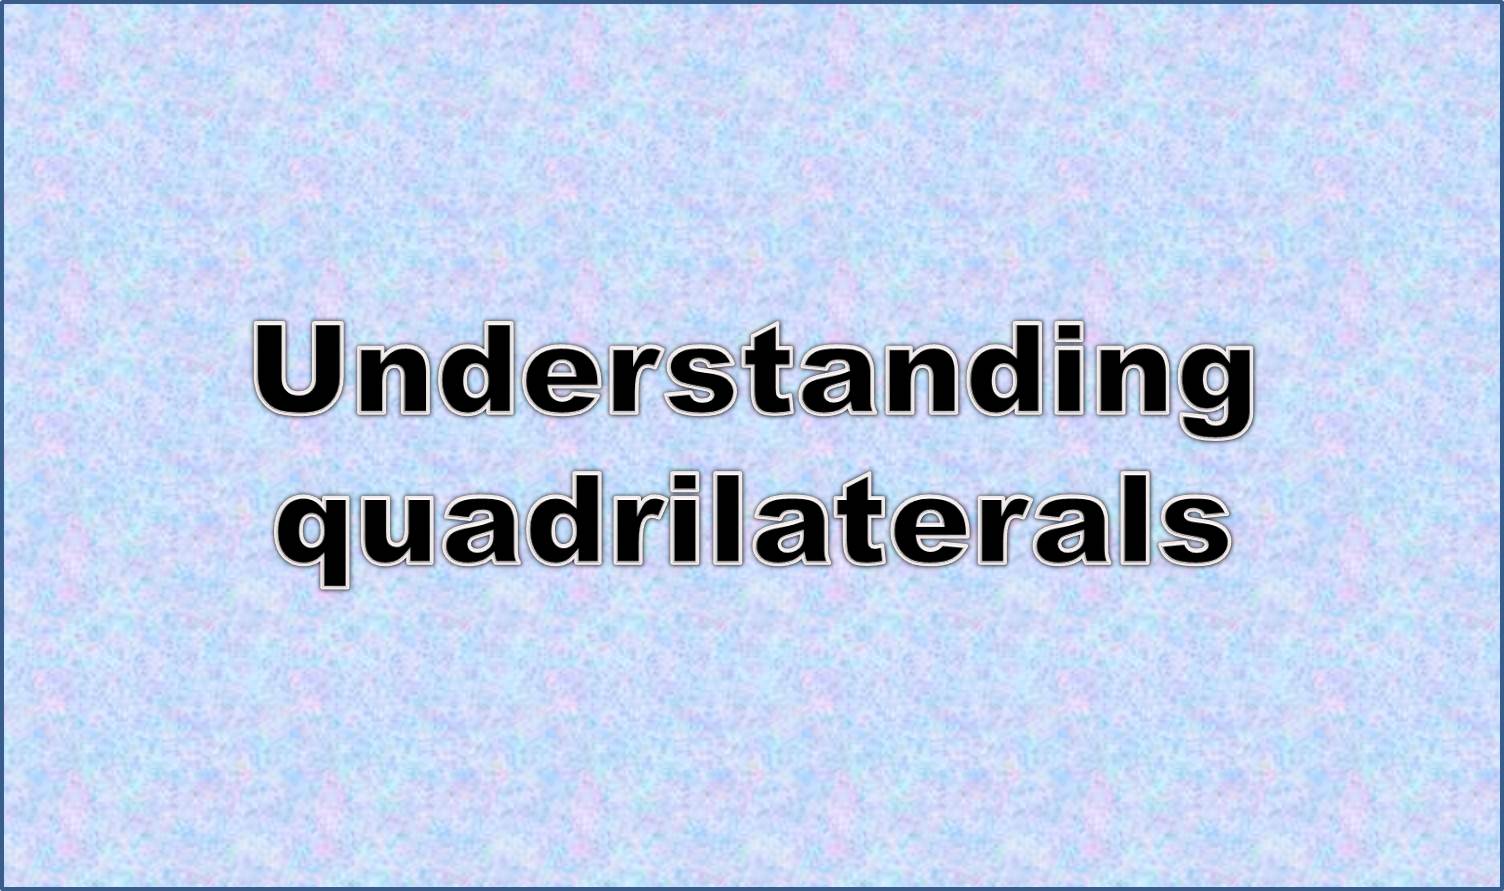 http://study.aisectonline.com/images/Quadrilateral types.jpg